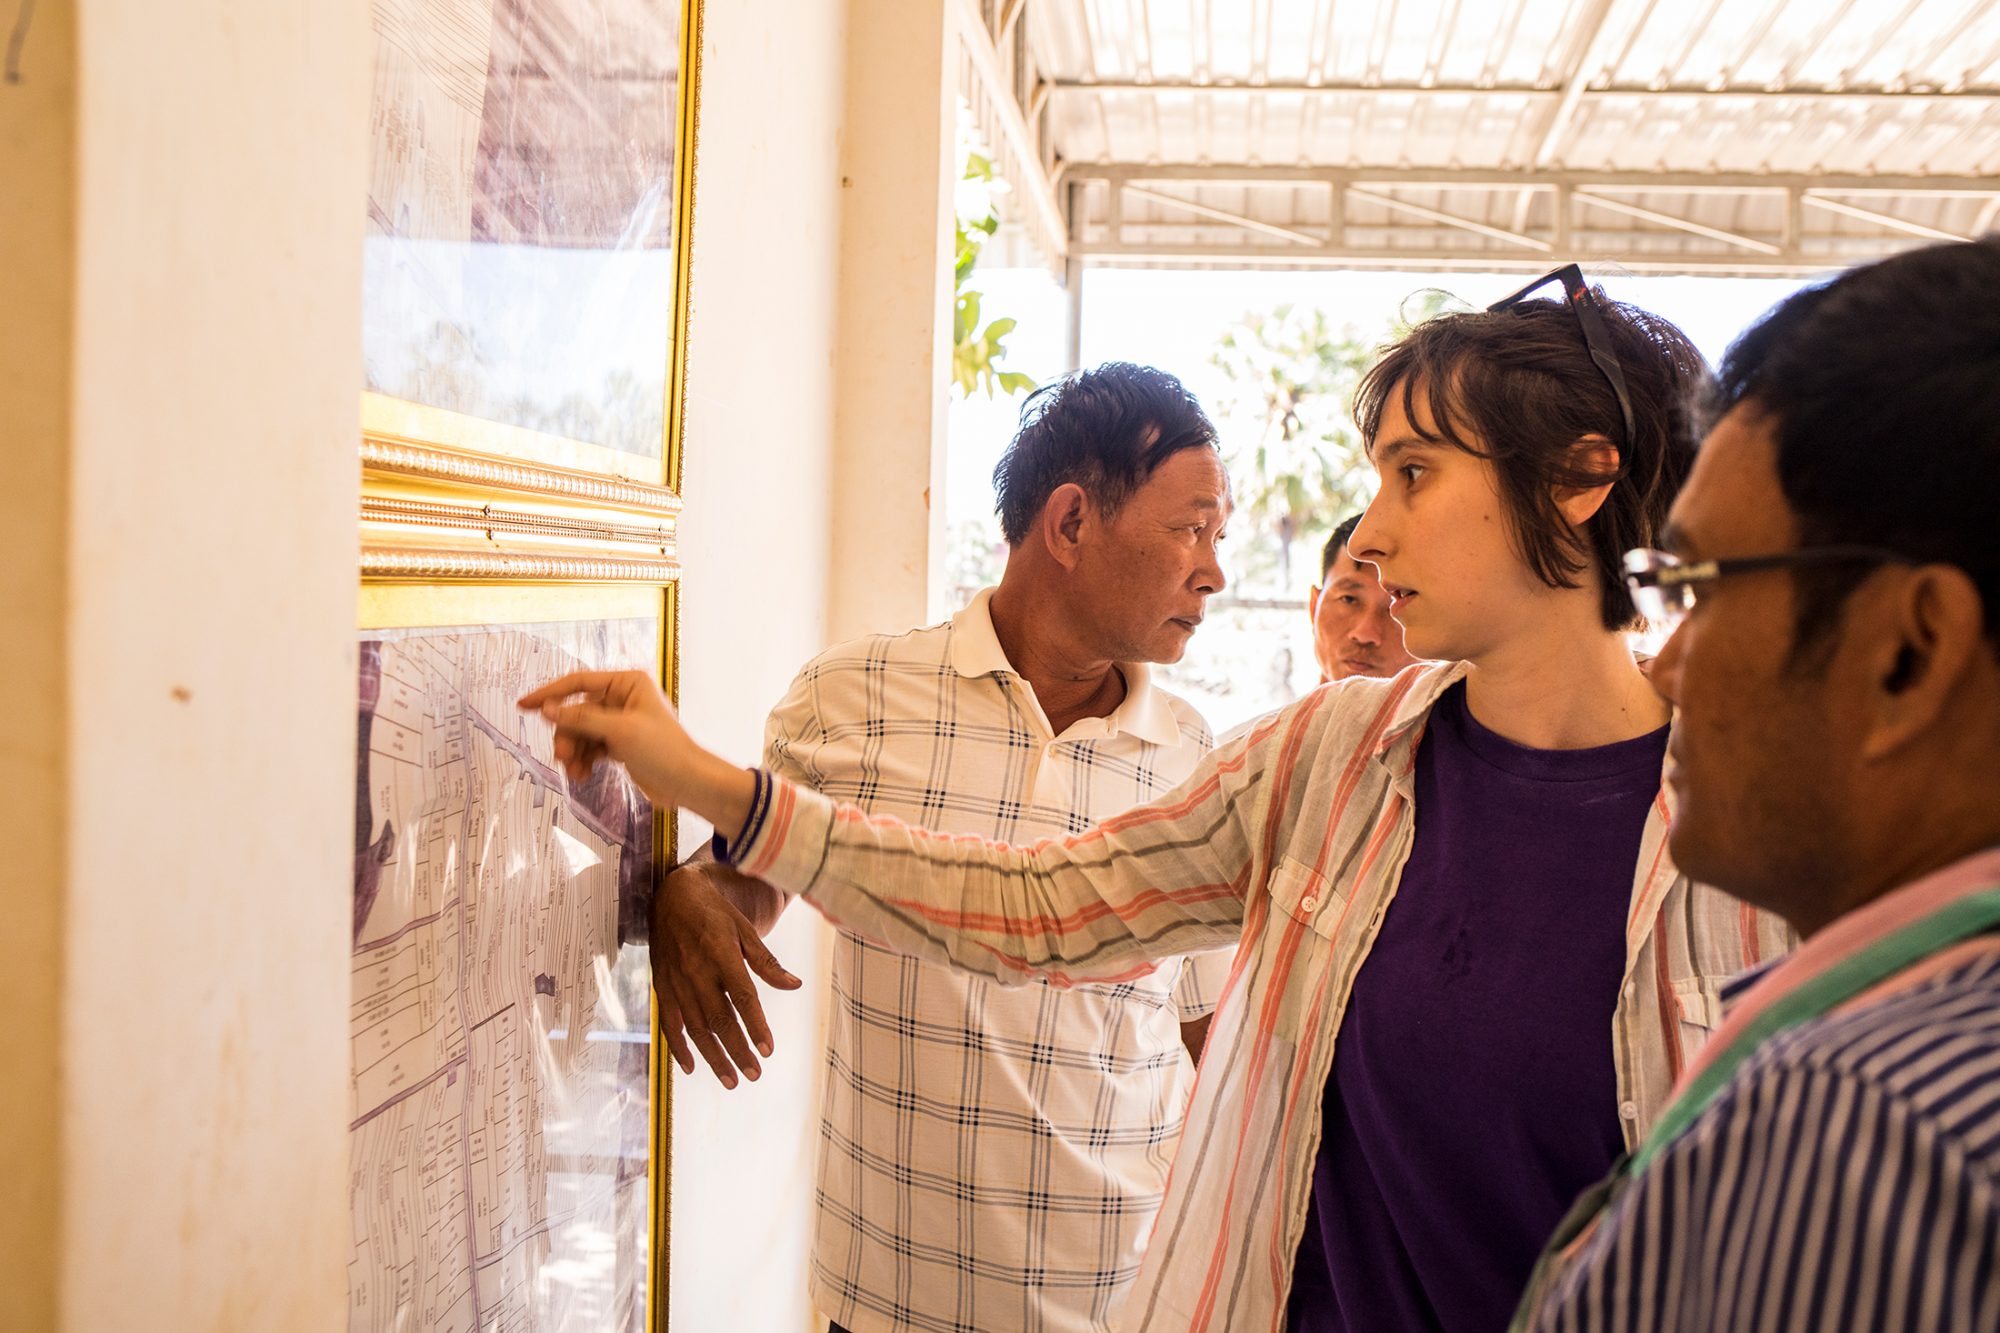 Three Cambodian farmers and Yasmine gather around a faded purple map posted on the wall